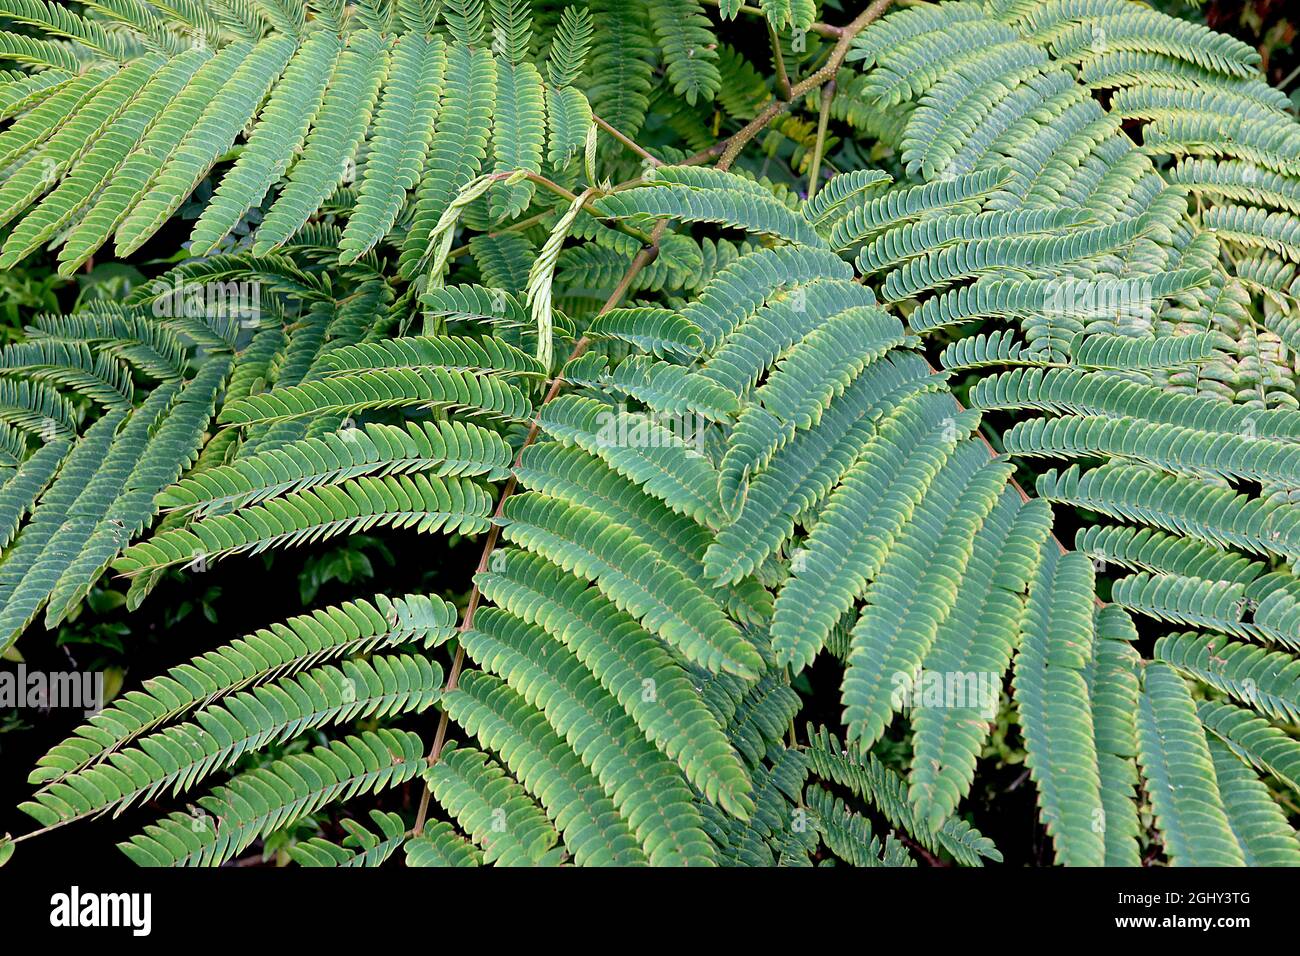 Albizia julibrissin ‘Rosea’ pink silk tree – large fern-like yellow green leaves on arching stems,  August, England, UK Stock Photo